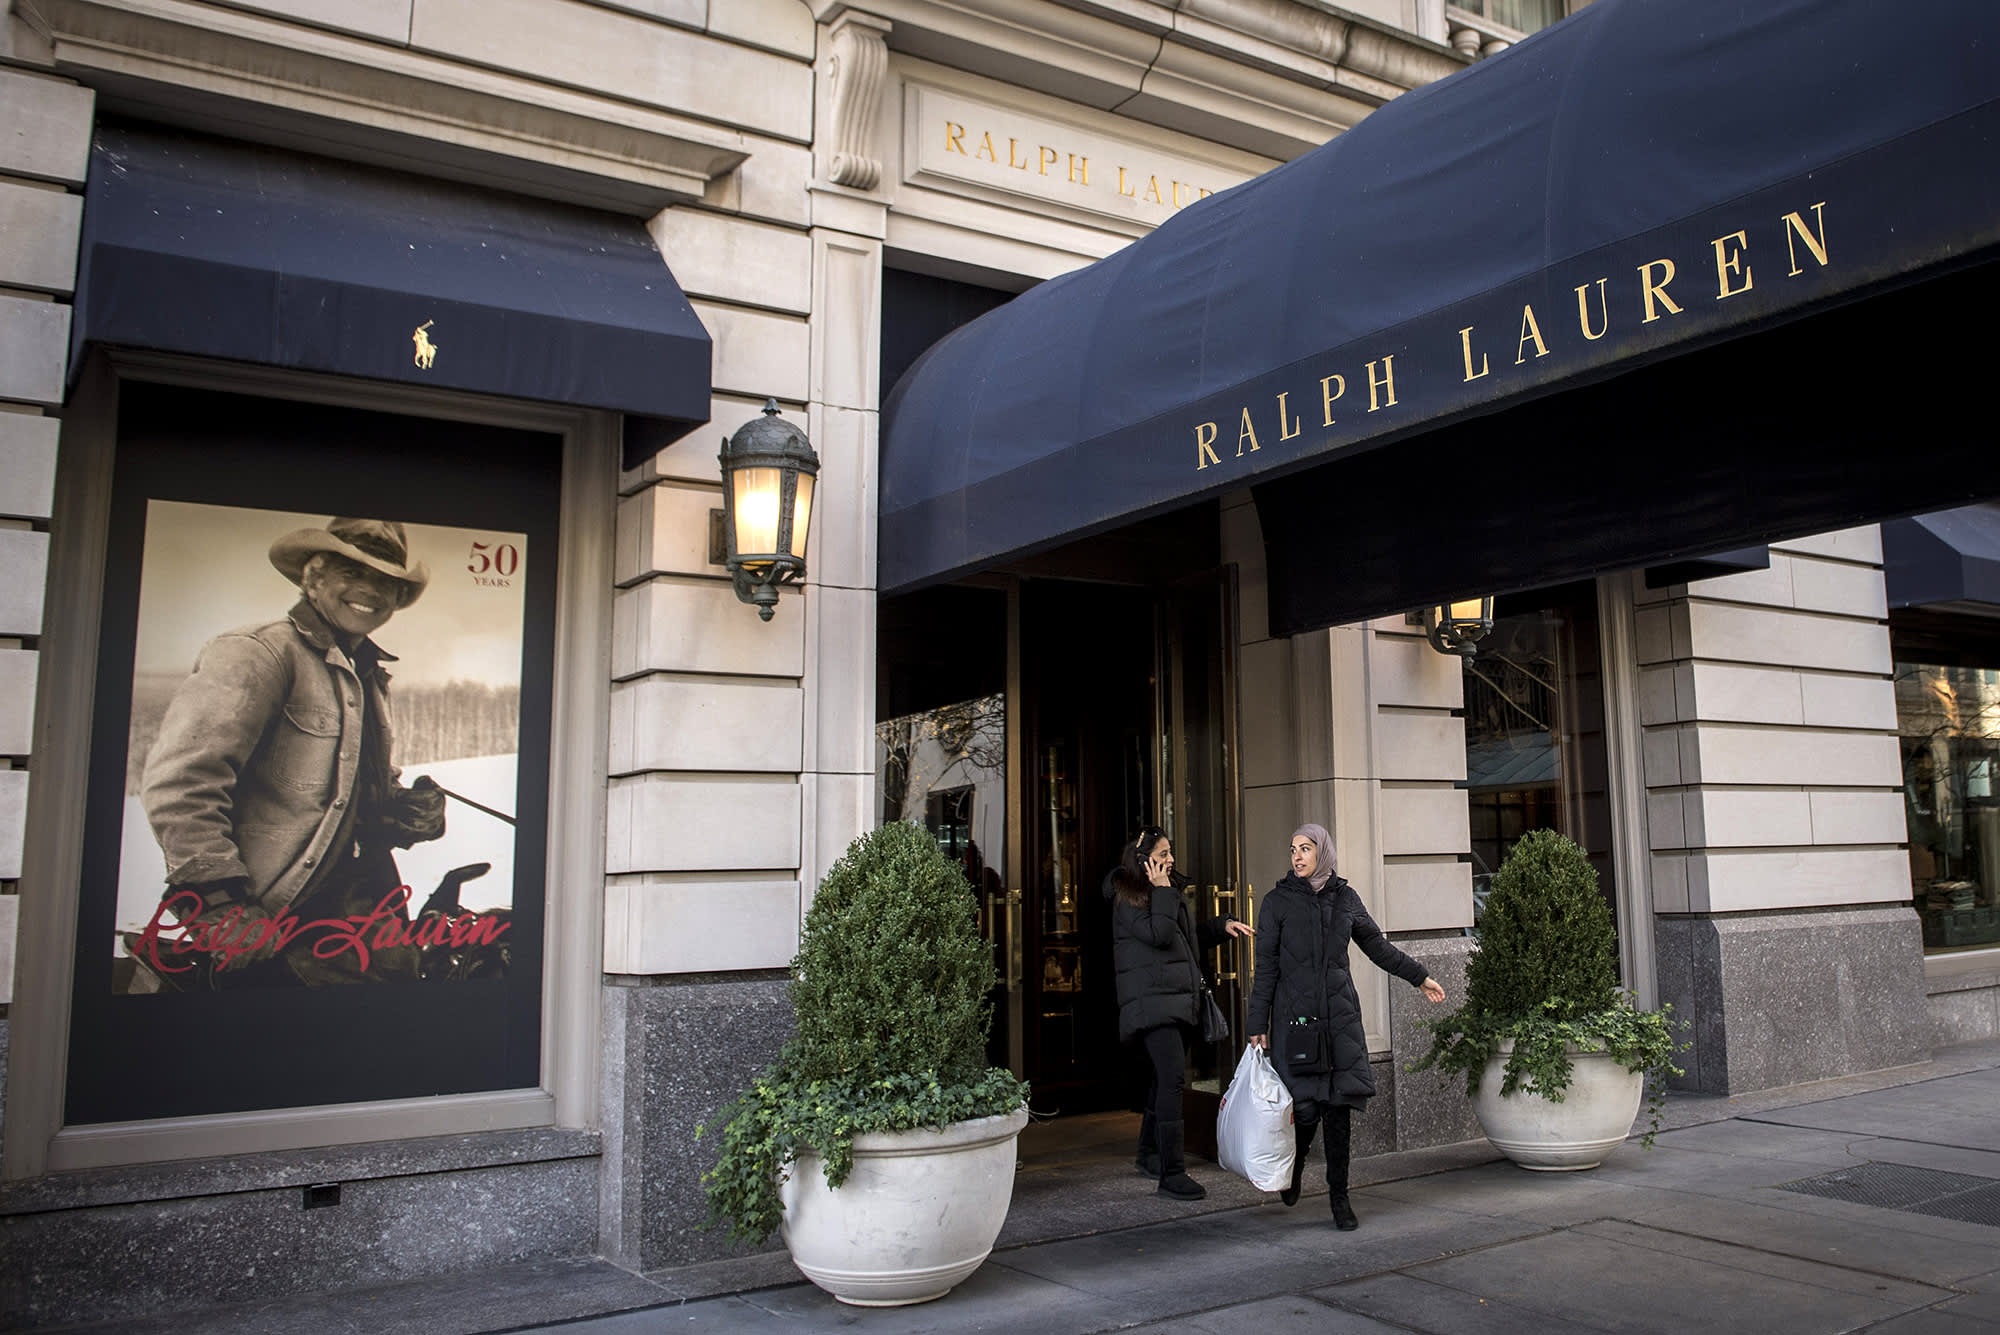 Ralph Lauren CEO says metaverse is way to tap into younger shoppers